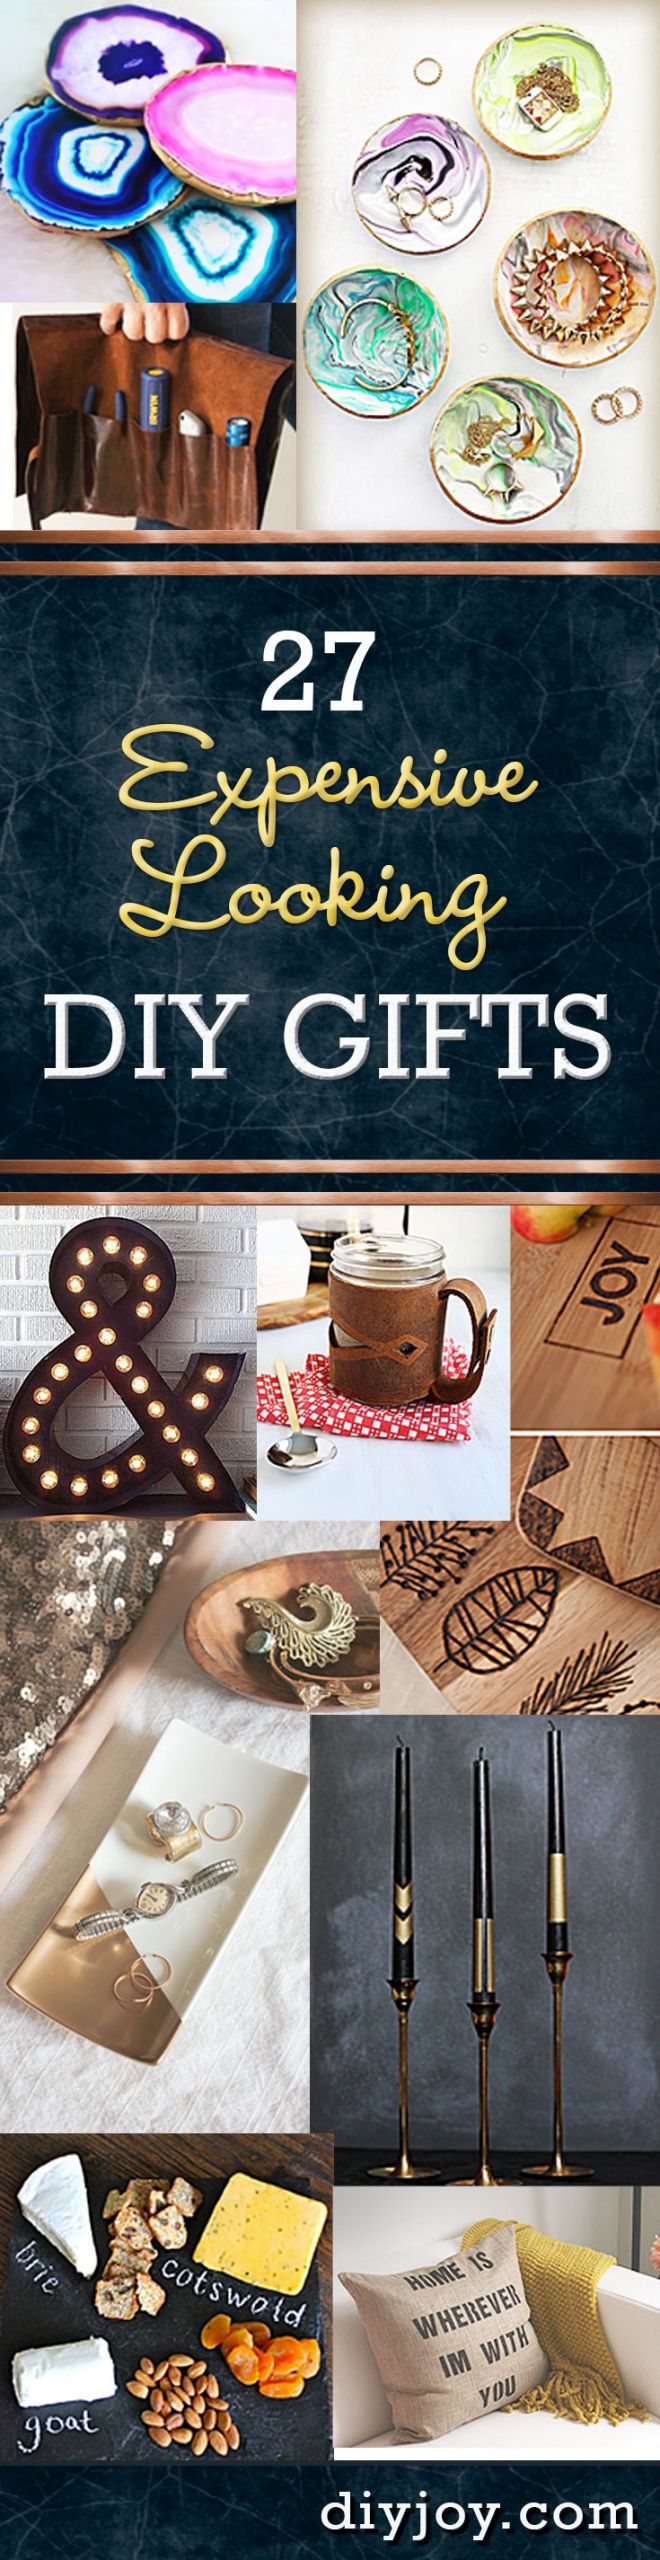 Unique DIY Gifts
 27 Expensive Looking Inexpensive DIY Gifts